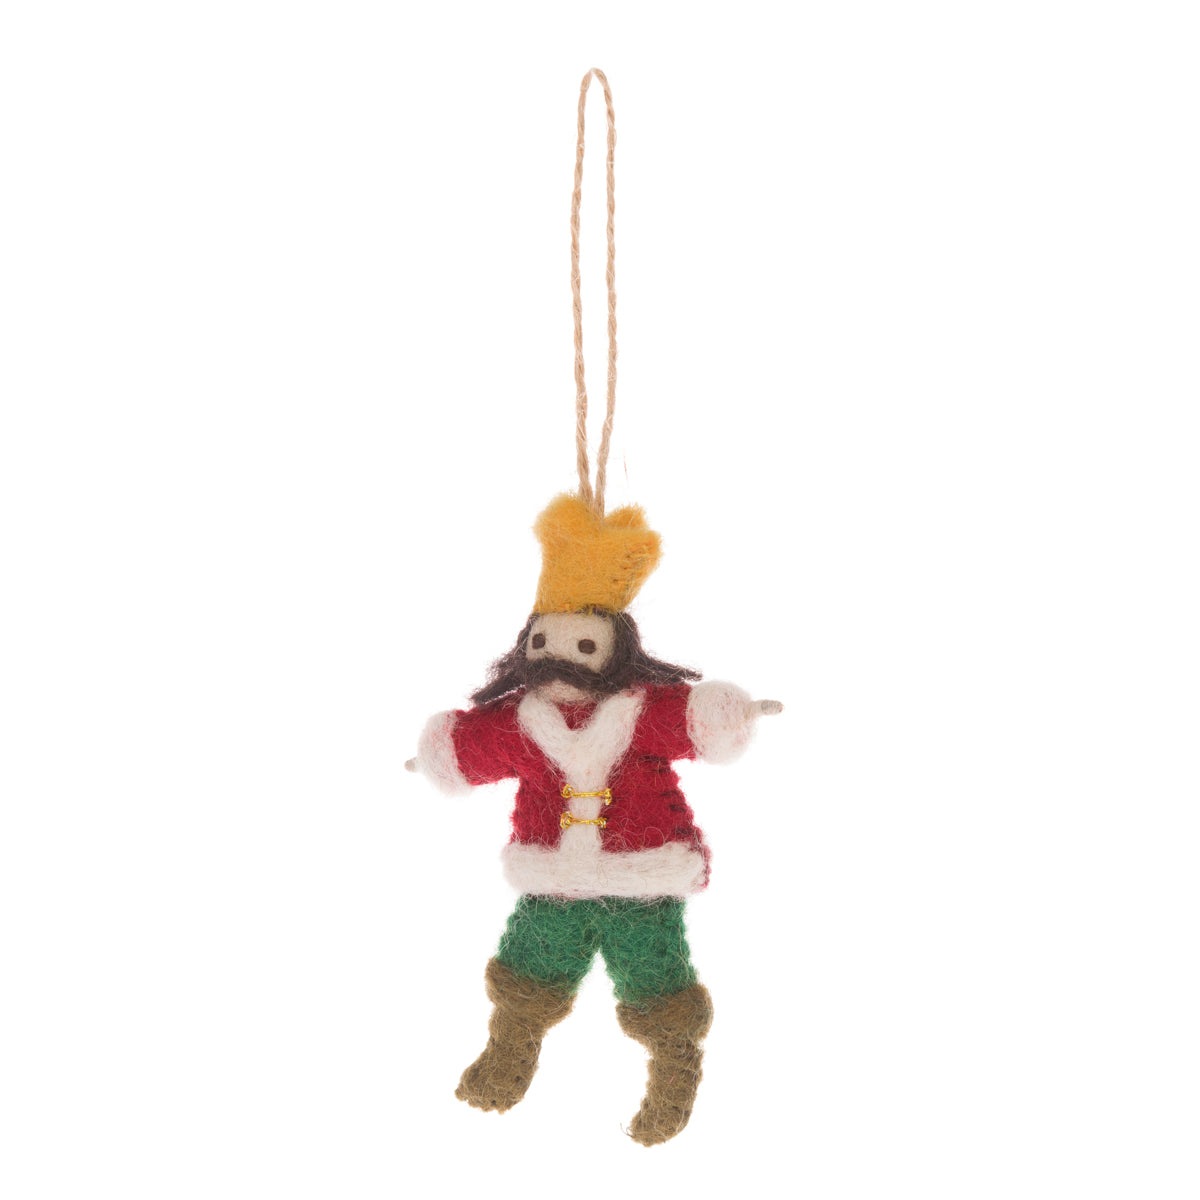 Lord Leaping Felt Decoration